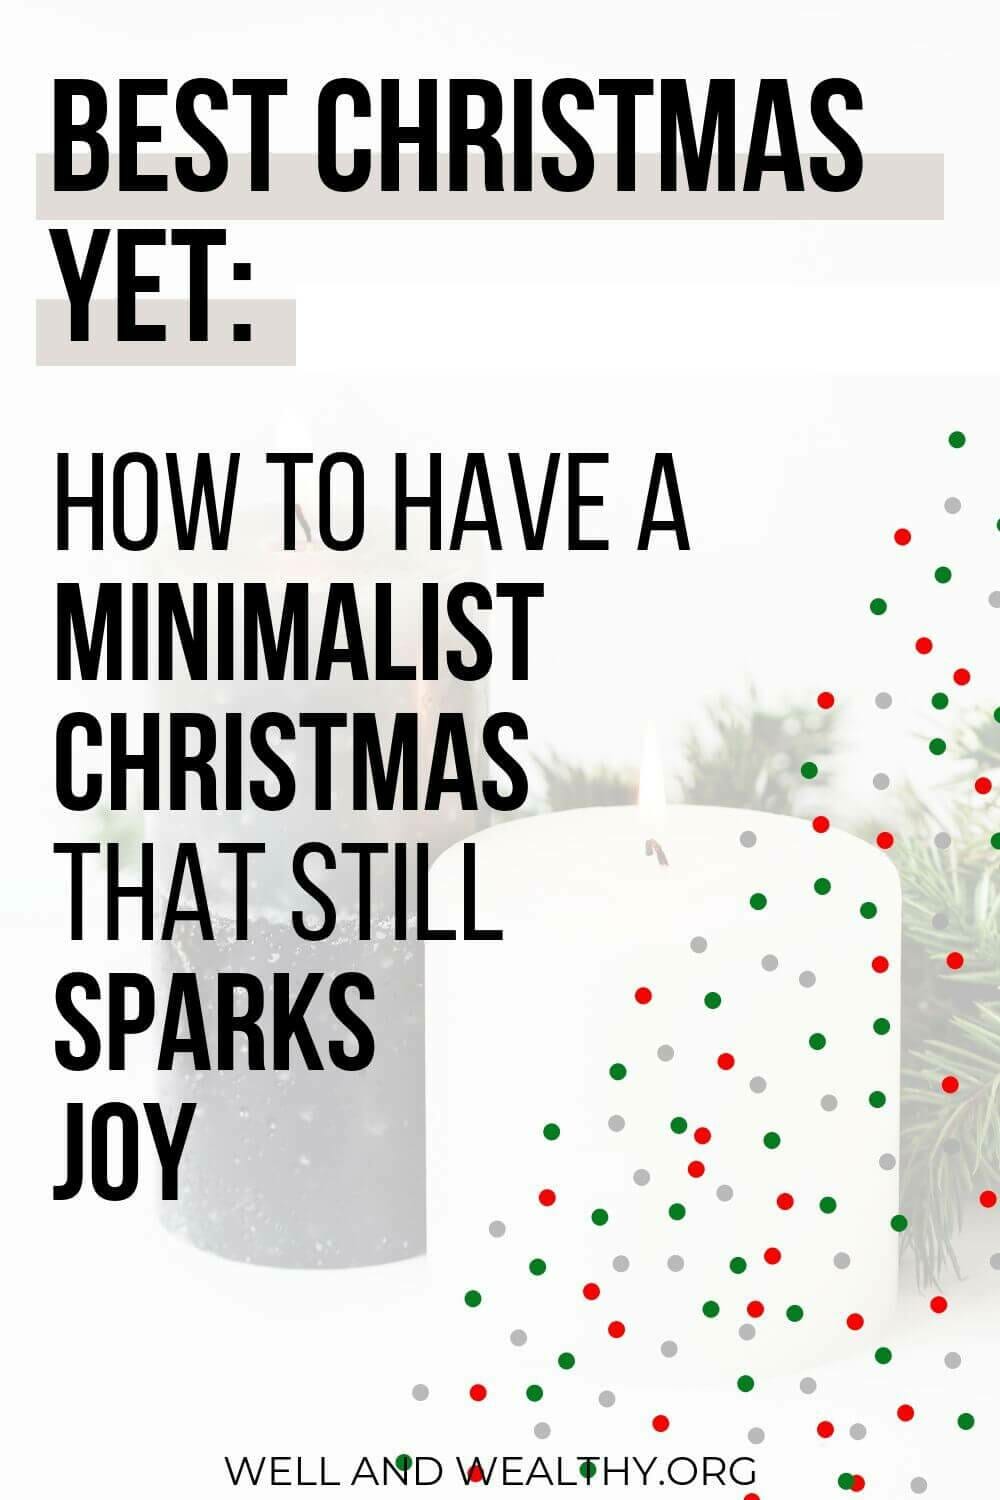 Make your Christmas stress-free this year with minimalism! Take your holidays from crazy overconsumption to calm and happy with the minimalist Christmas ideas in this post. From gifts, decorations, trees, aesthetic, decorating, presents, cards and so much more you will everything you need to create your most magical and best Christmas yet. #minimalistchristmas #minimalist #christmas